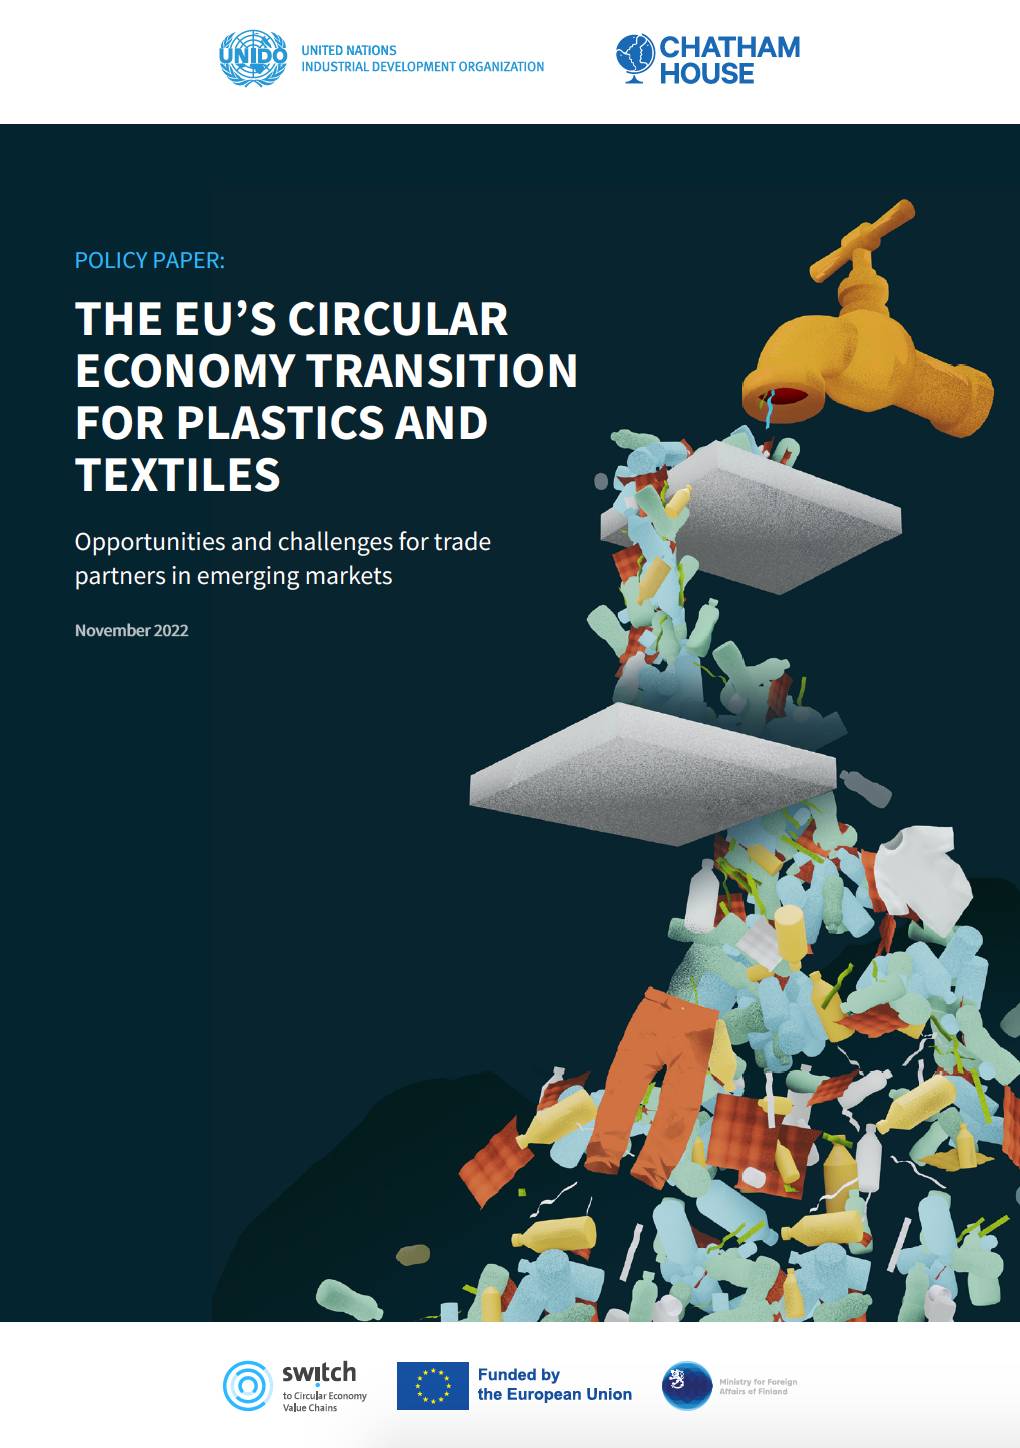 The EU's Circular Economy transition for plastic and textiles